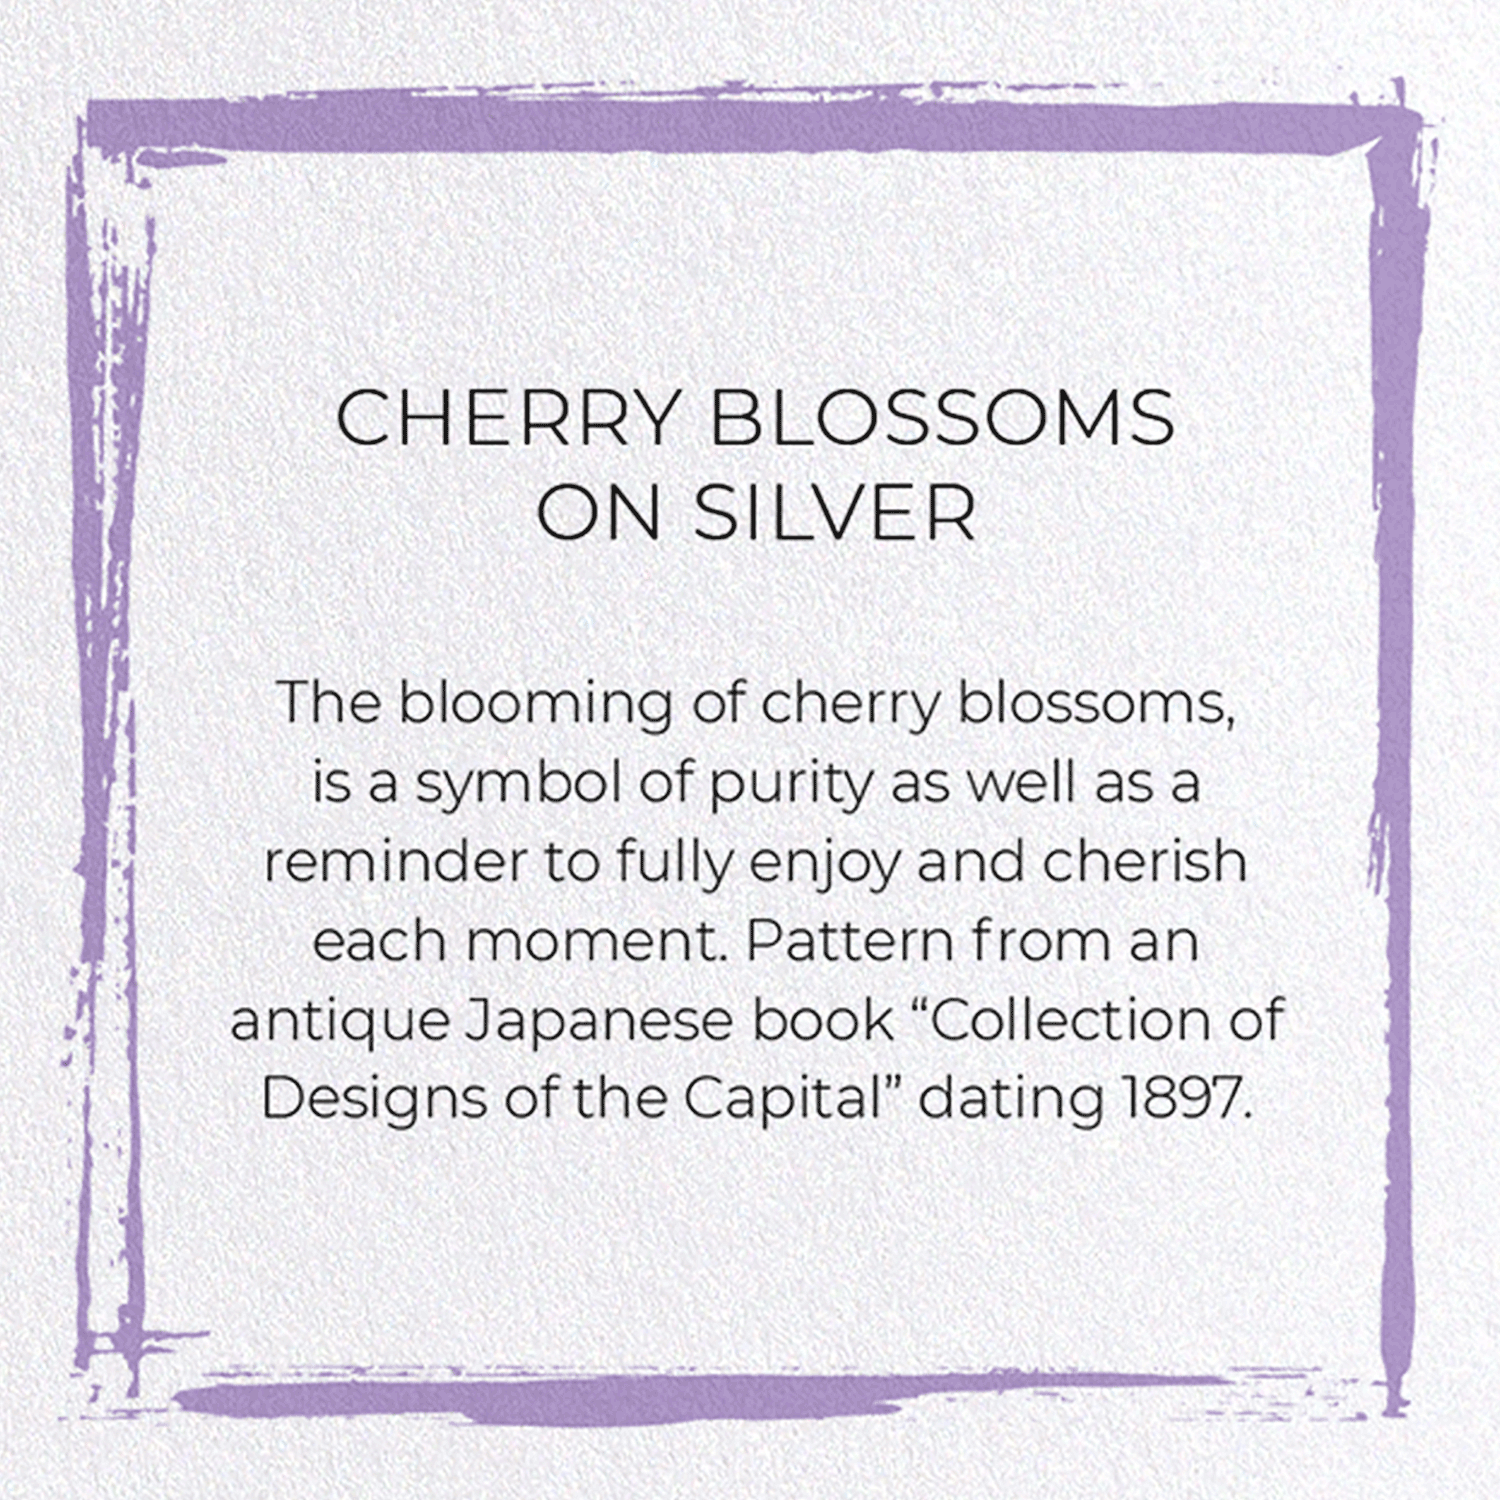 CHERRY BLOSSOMS ON SILVER